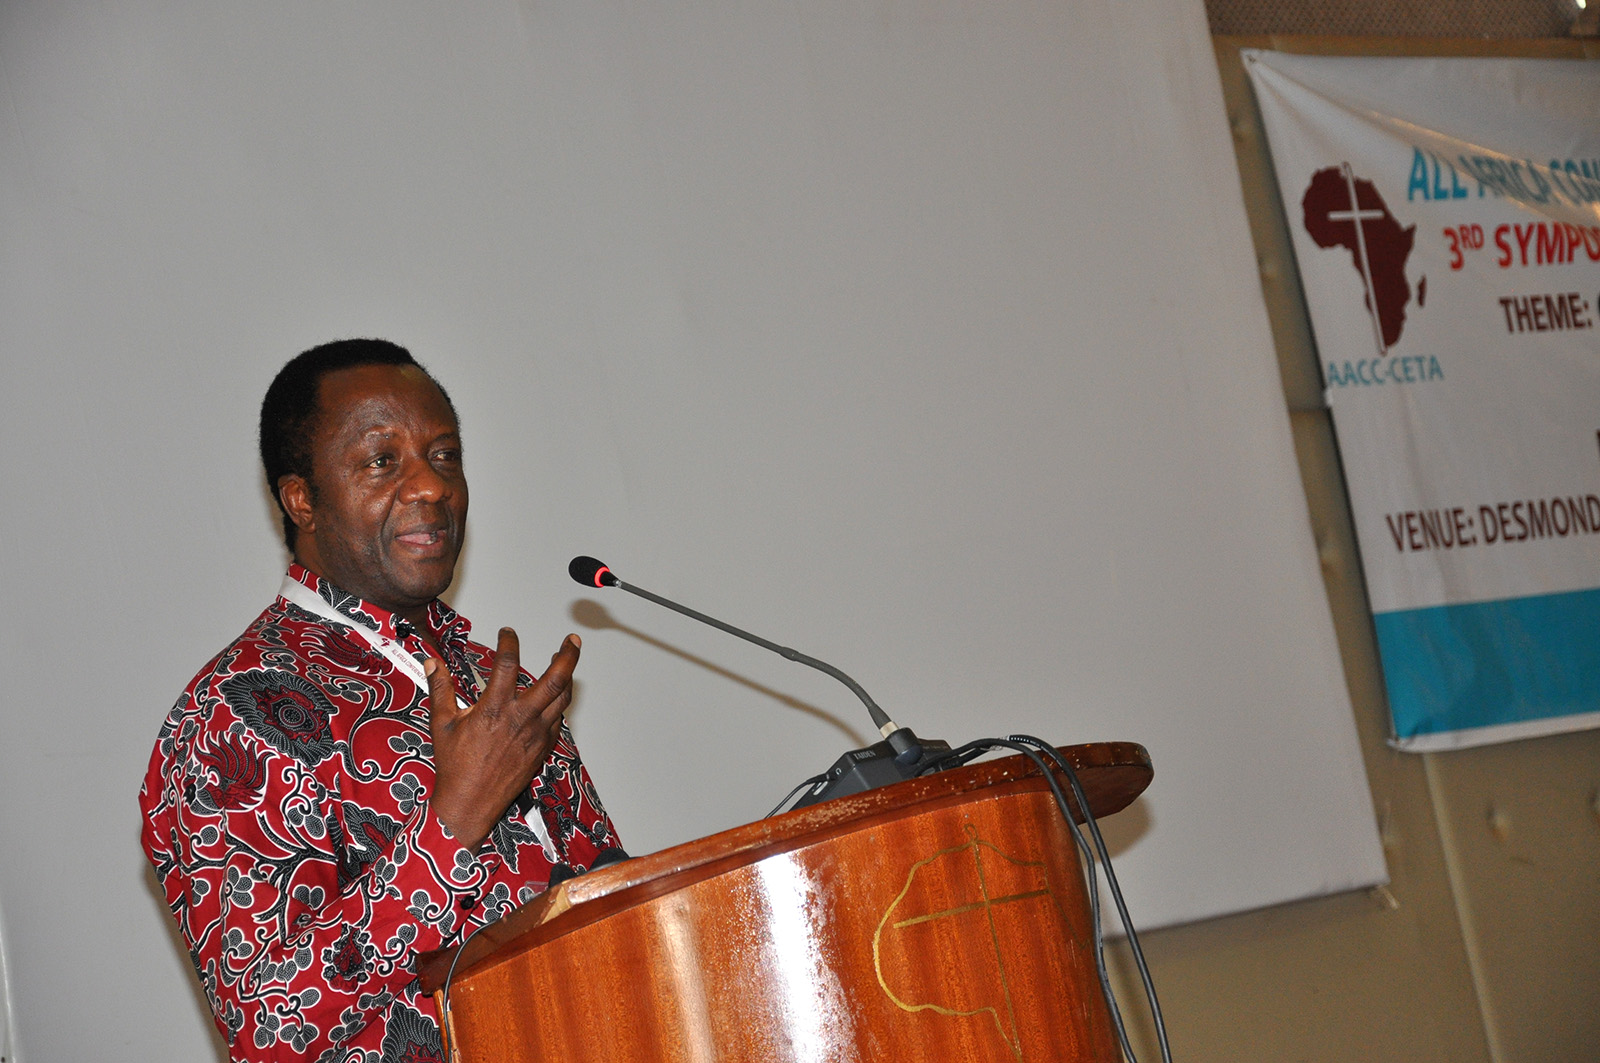 The Rev. Fidom Mwombeki, a Tanzania Lutheran pastor who is the general secretary of the All Africa Conference of Churches, speaks at the closing of the 3rd Symposium on misleading Theologies in Nairobi, Kenya, on Nov. 24, 2021. RNS photo by Fredrick Nzwili